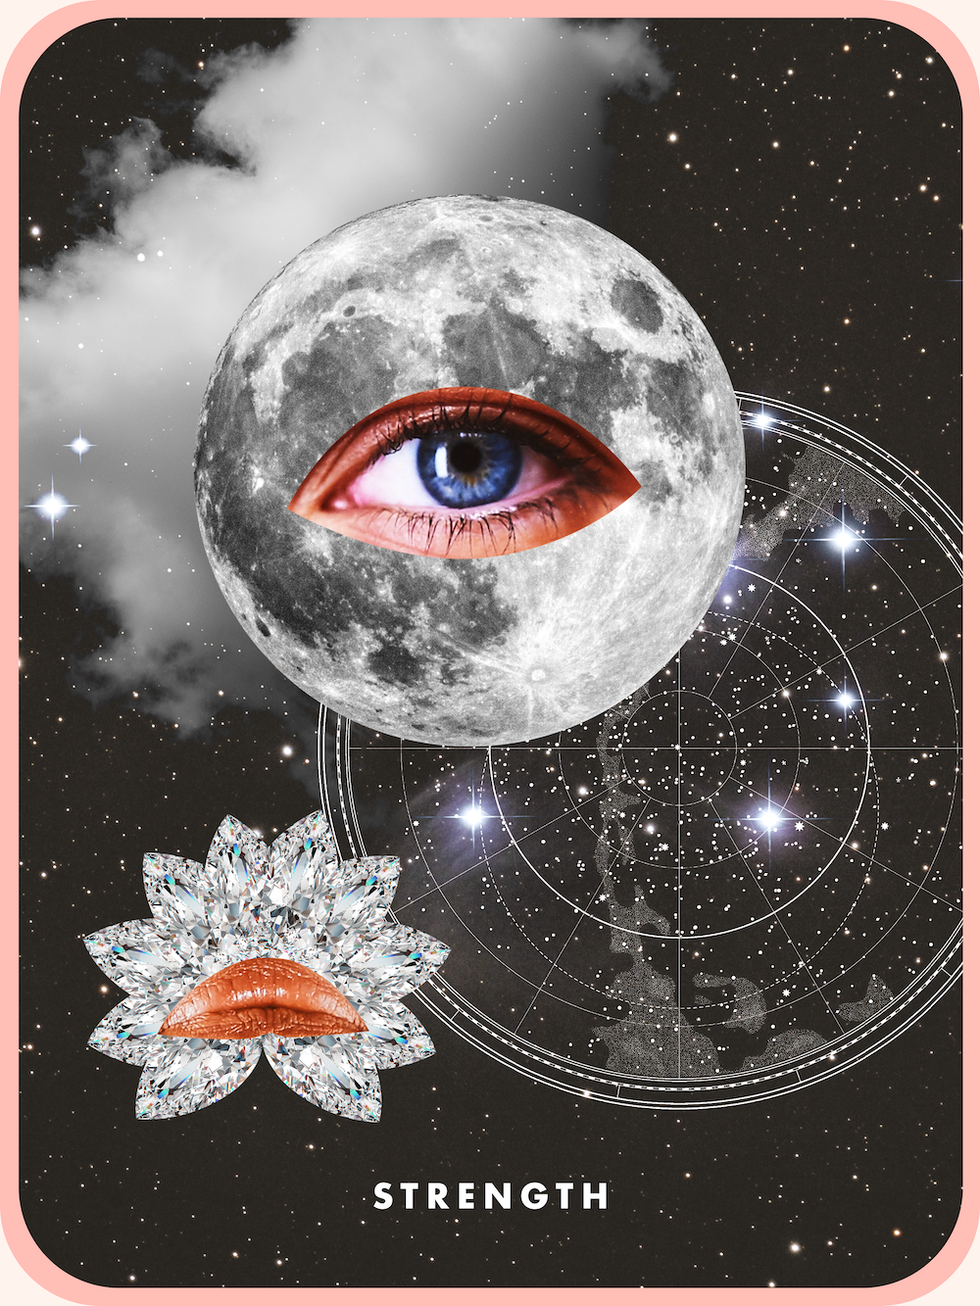 the tarot card strength, showing an eye on a full moon and a pair of lips upside down on a diamond, both in a starry sky